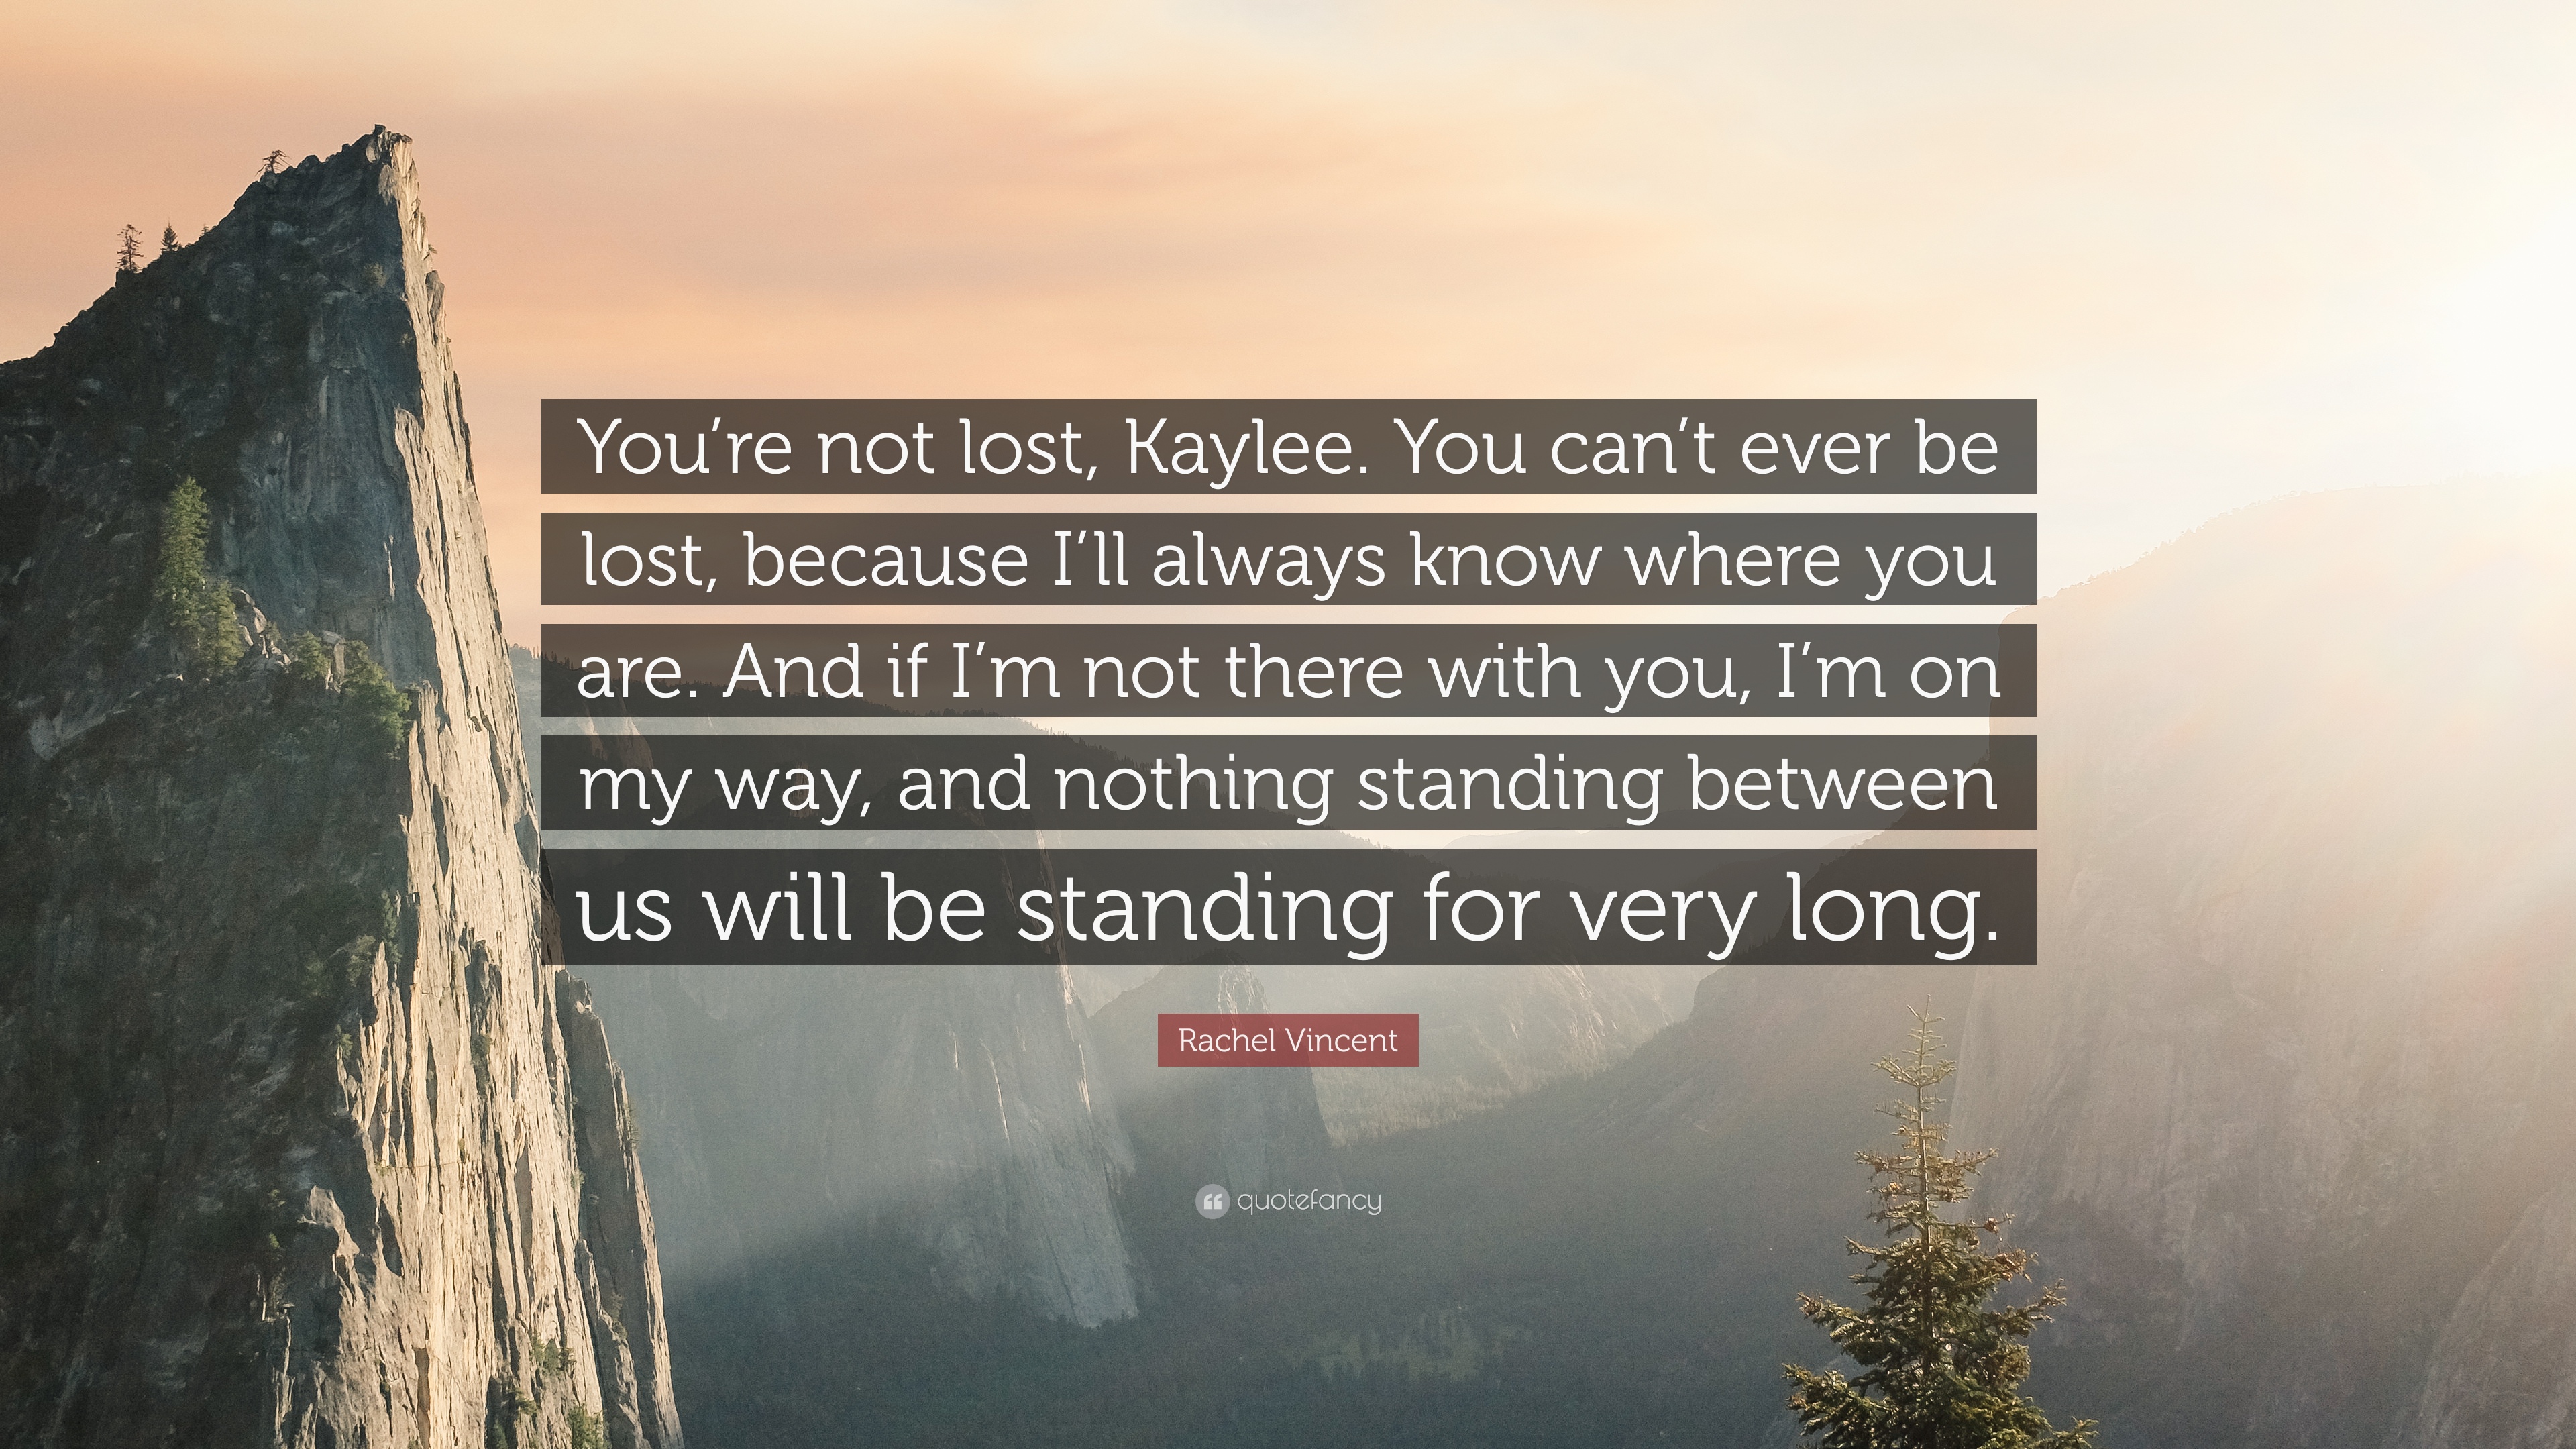 Rachel Vincent Quote: “You're not lost, Kaylee. You can't ever be ...